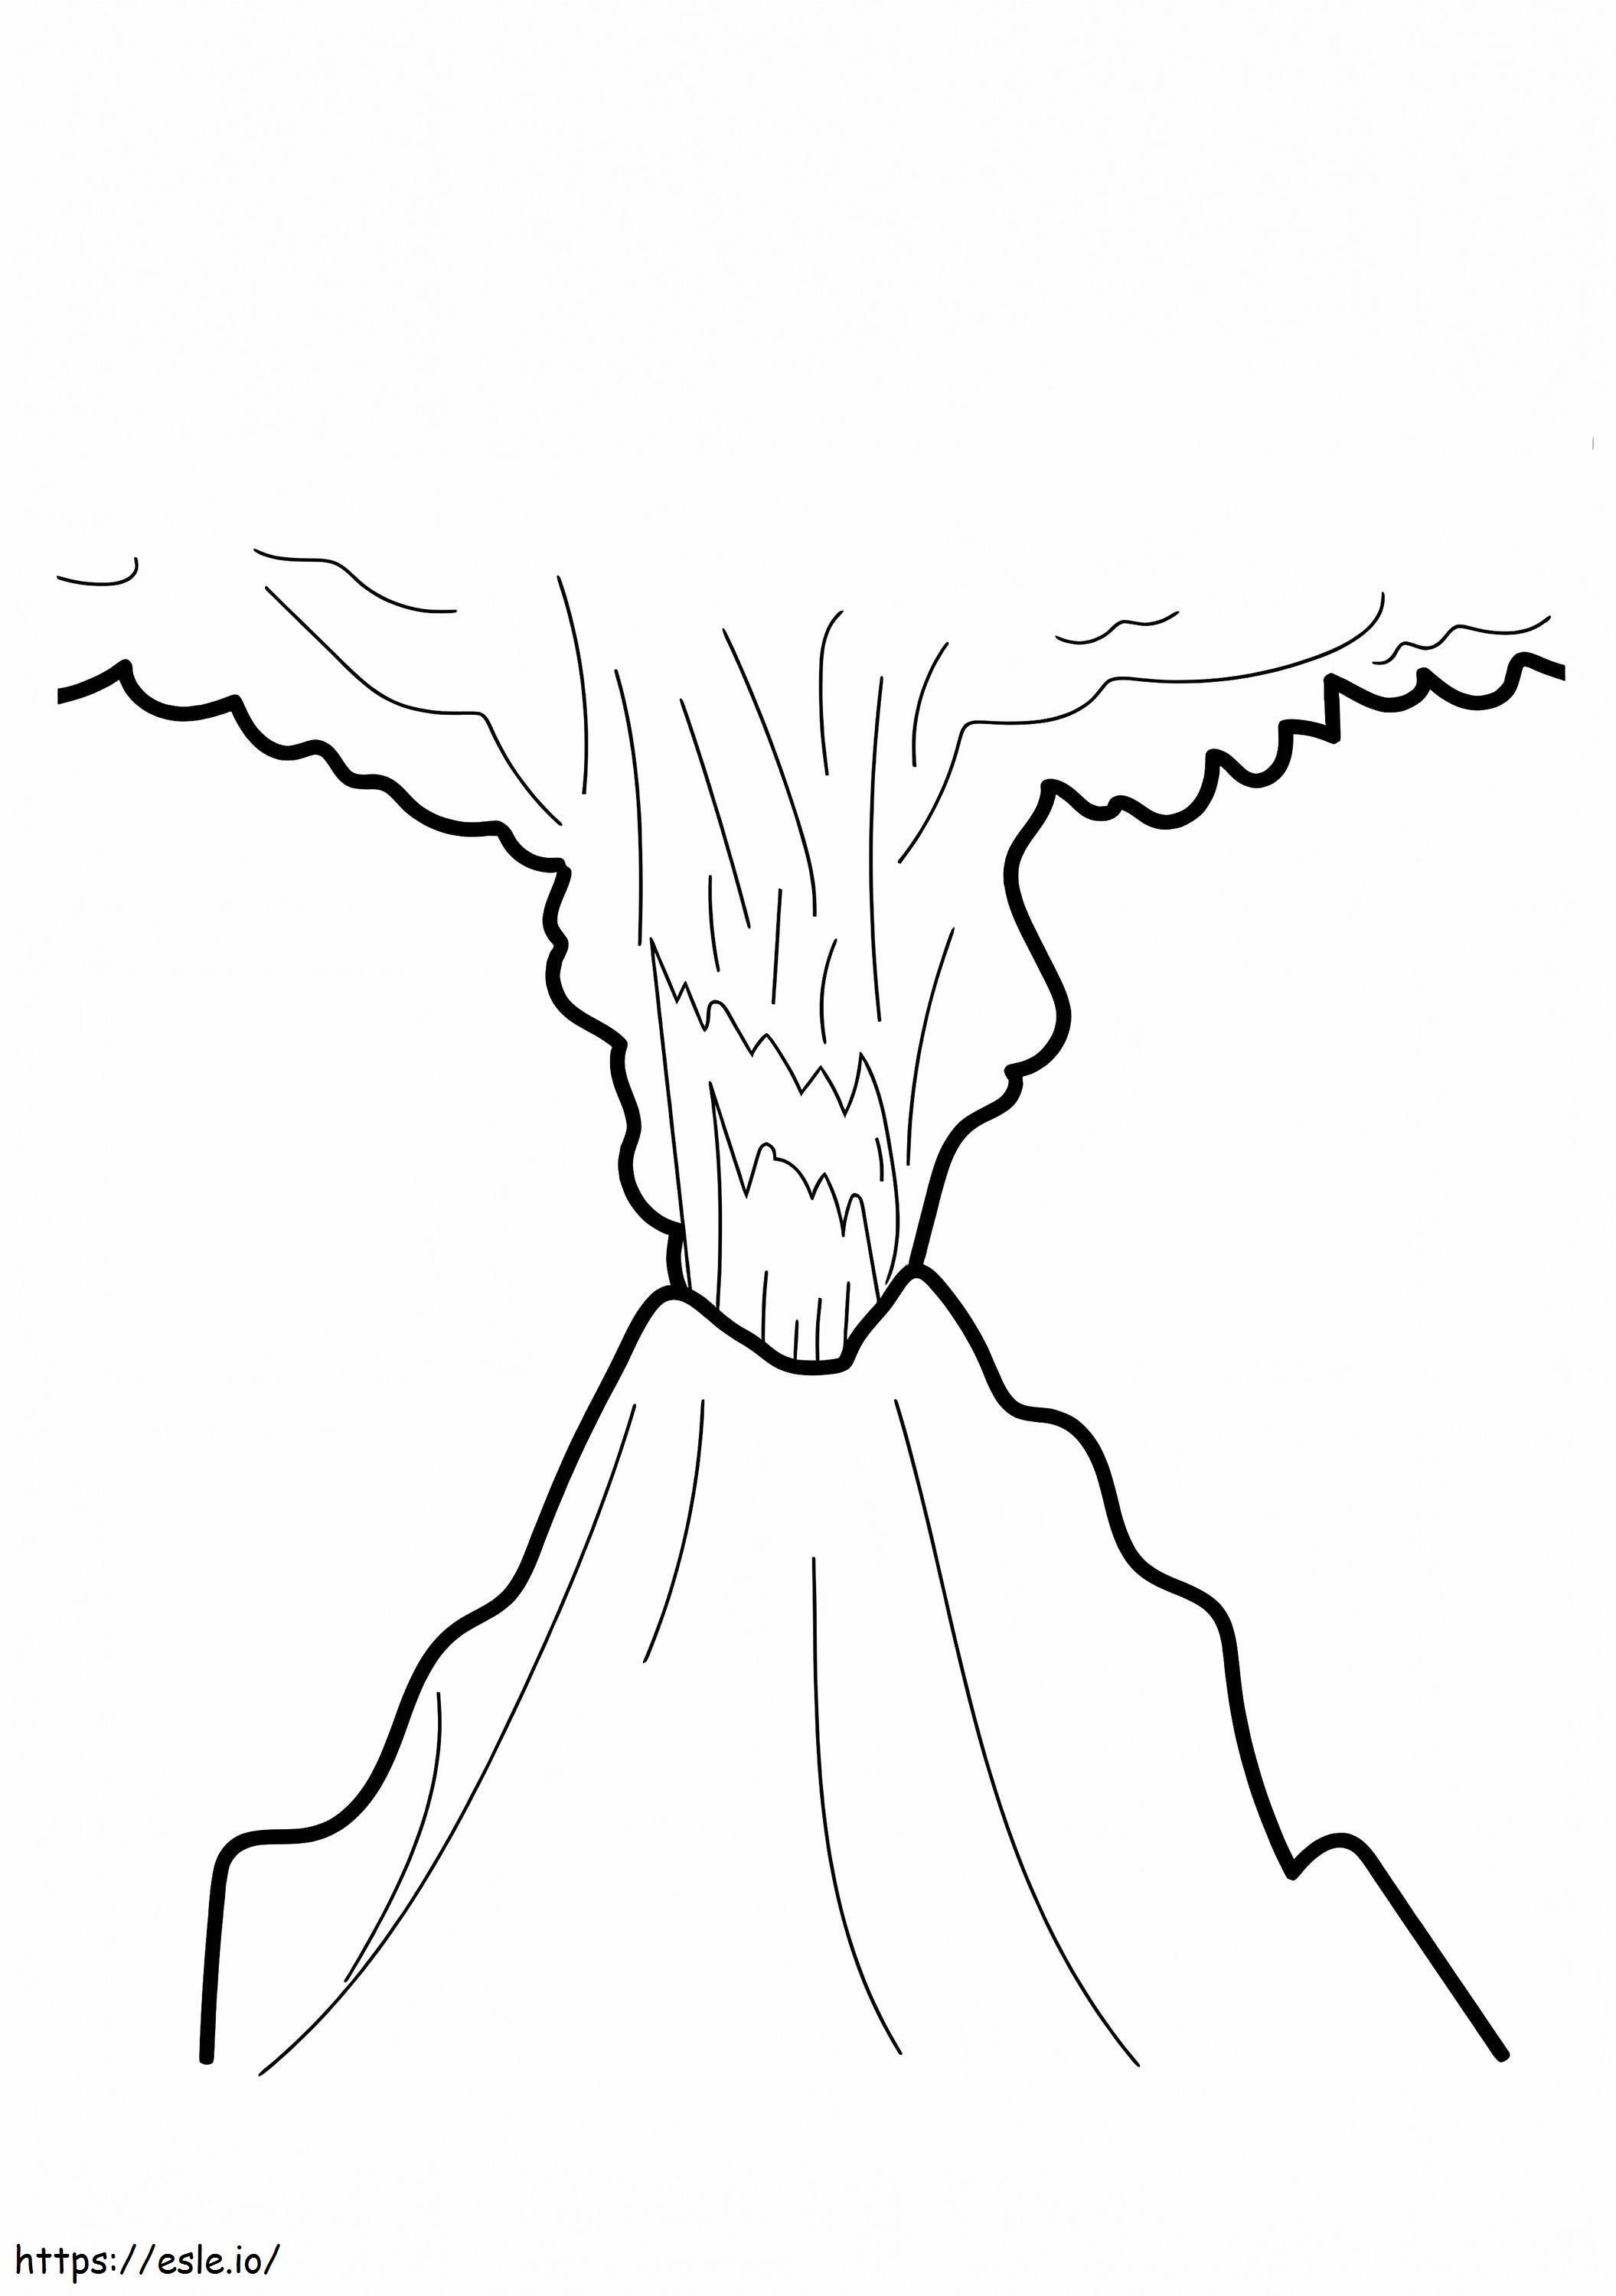 Erupting Volcano 1 coloring page